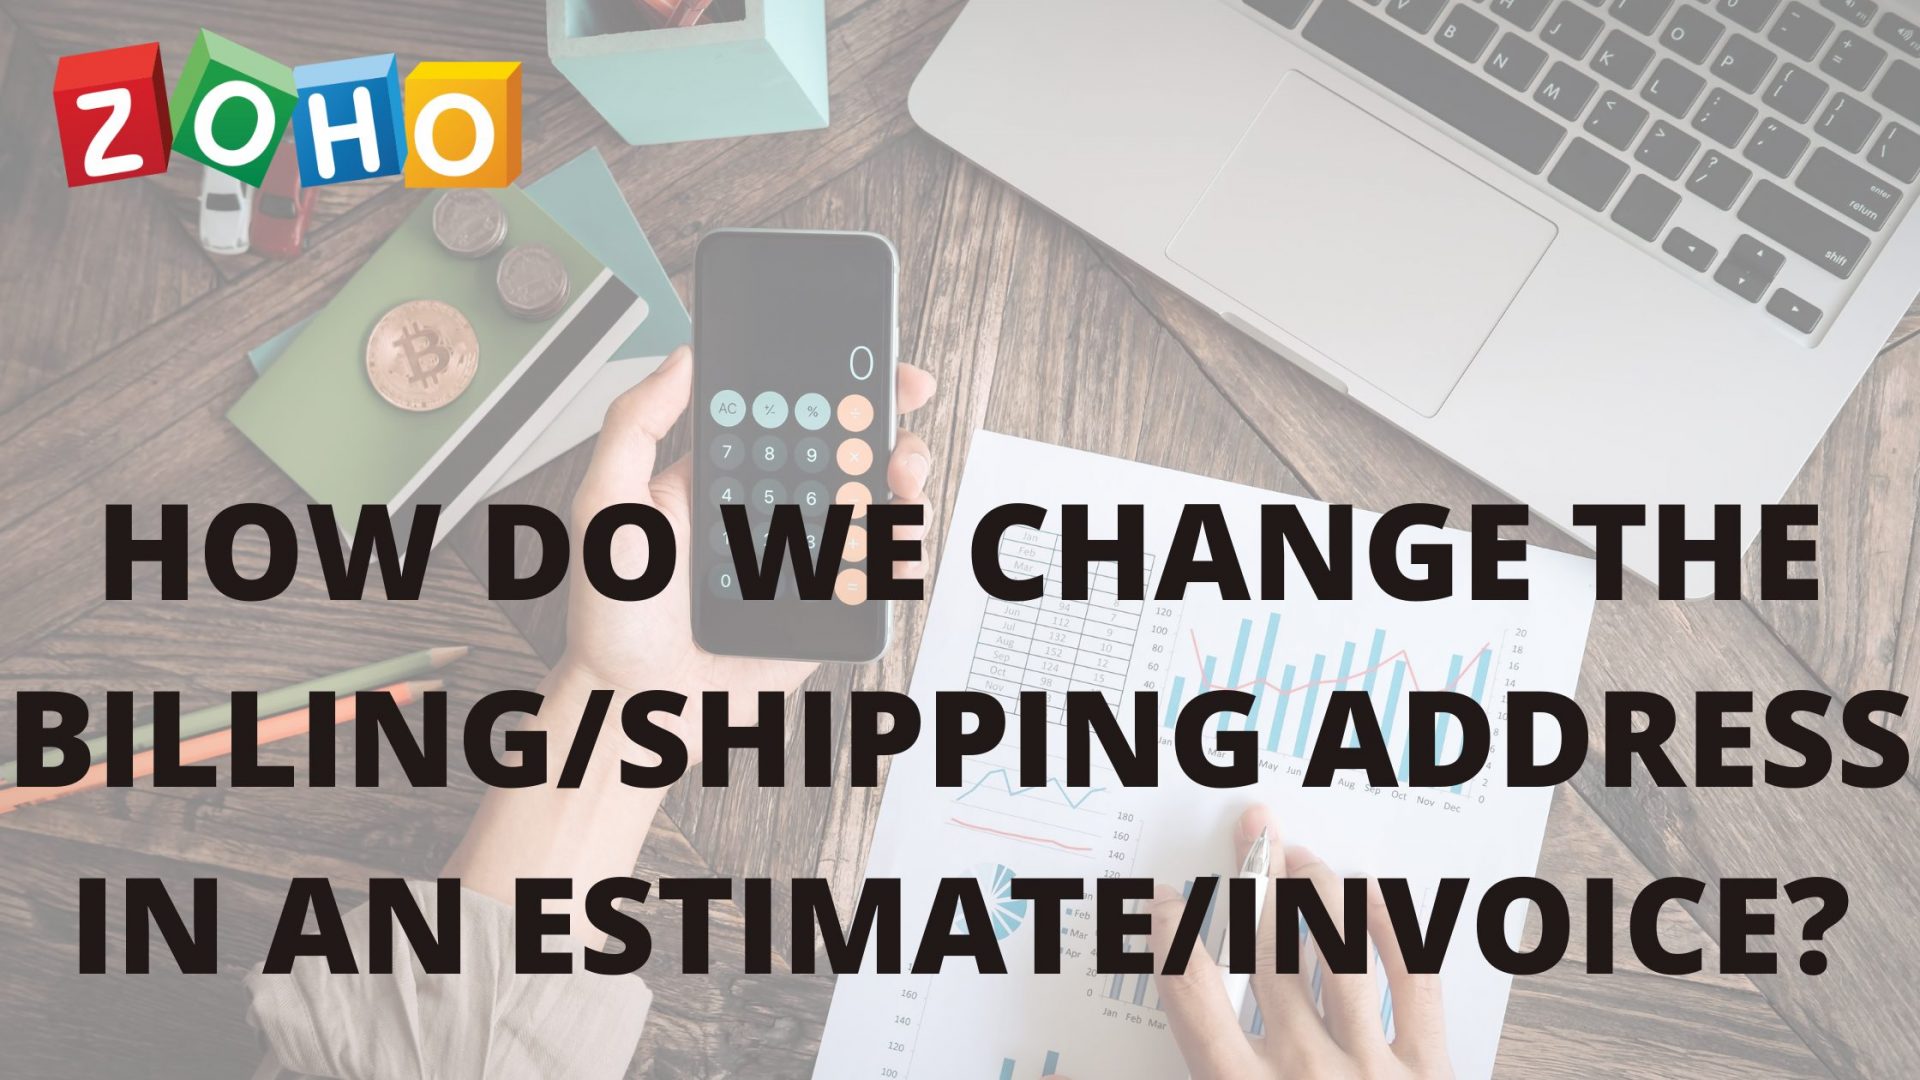 HOW do we change the billing/shipping address in an estimate/invoice